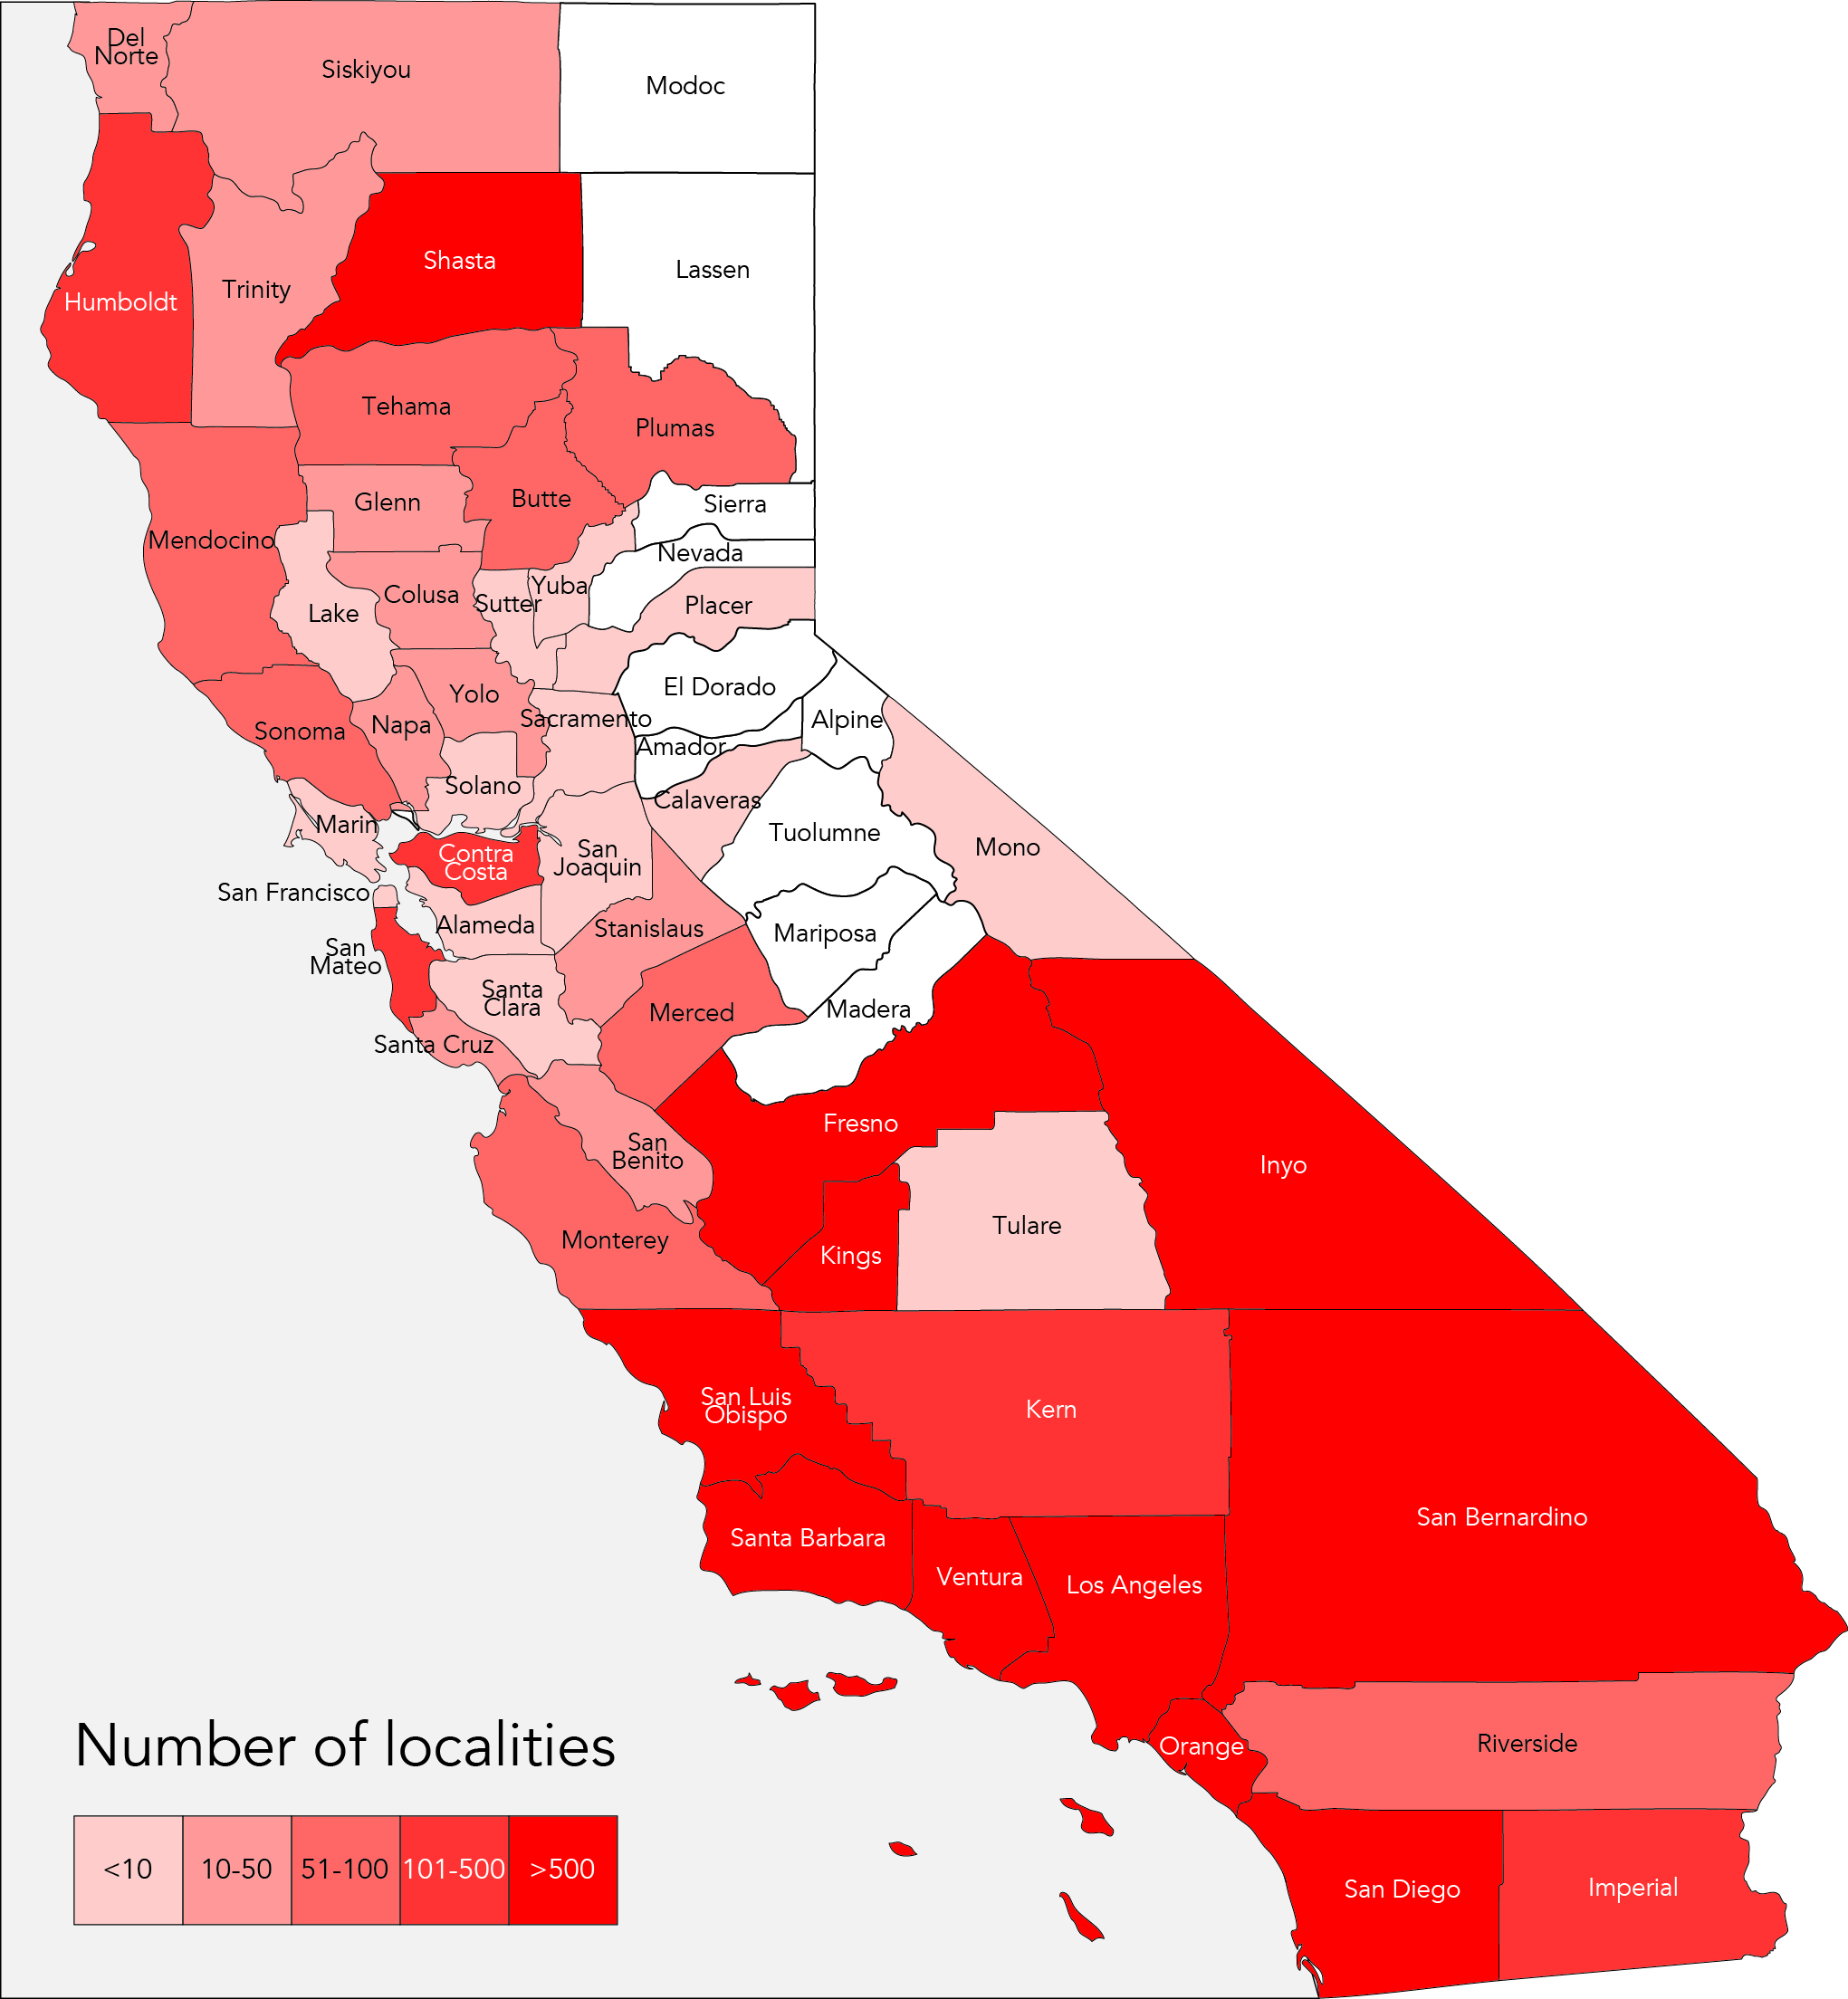 Numbers of localities per county within California